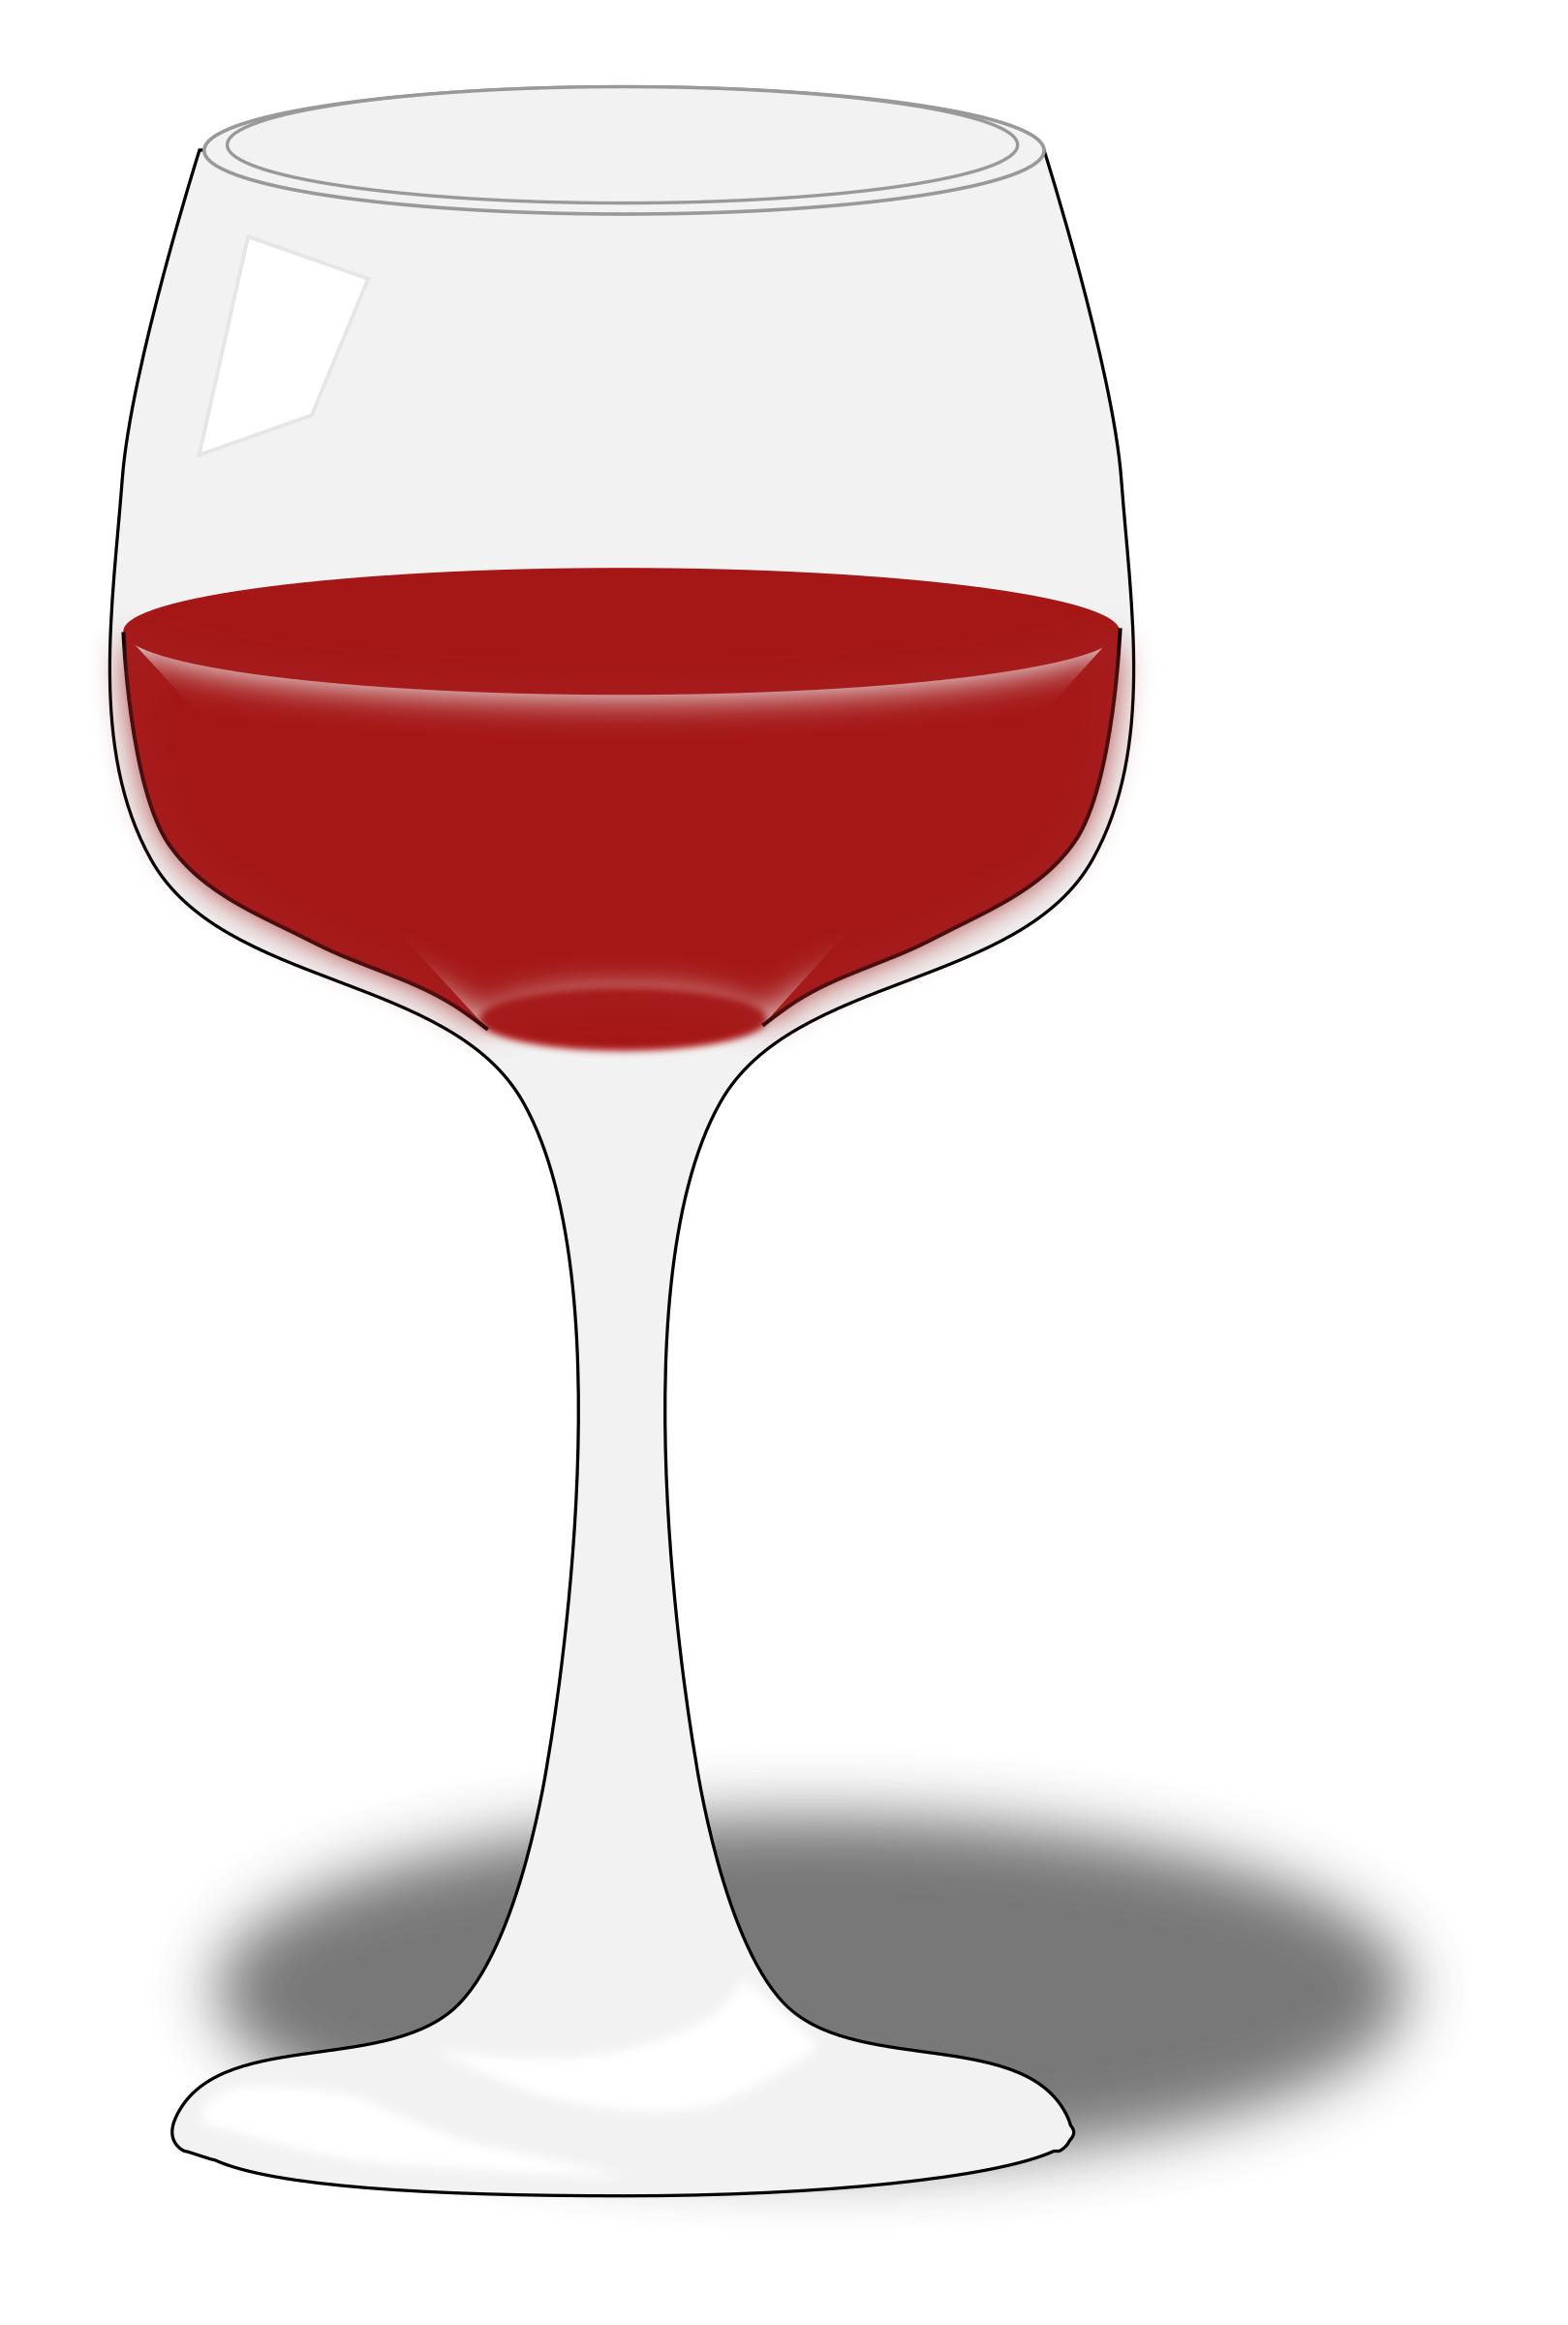 Wine glass 3d Icons PNG - Free PNG and Icons Downloads